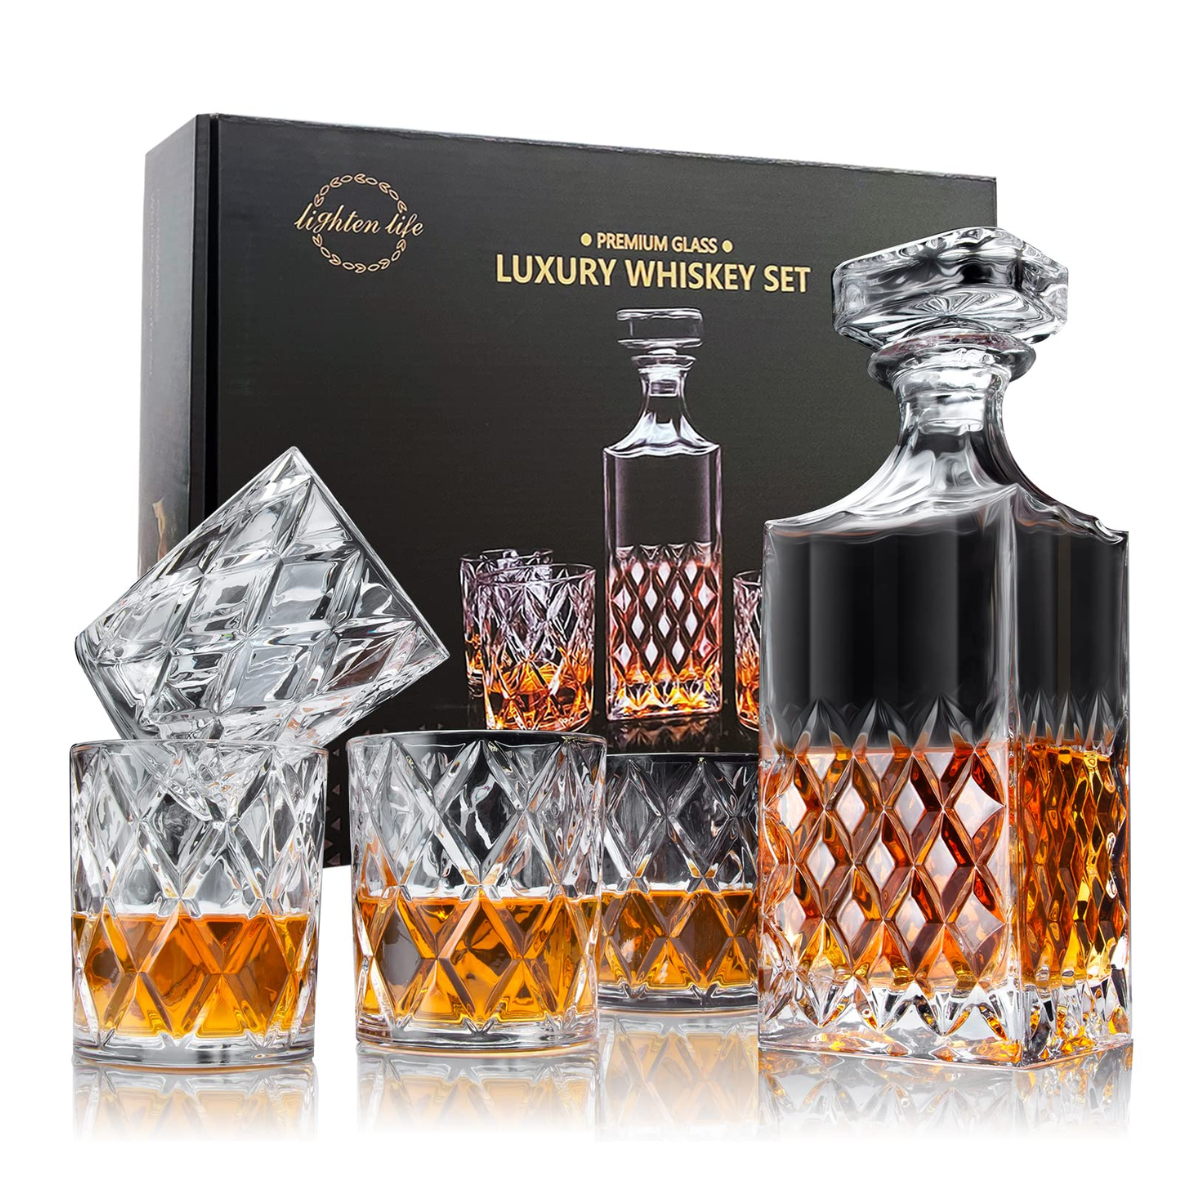 10. Raise a Glass to Love: Uniquely Personalized Whiskey Decanter Set for Anniversary Gifts